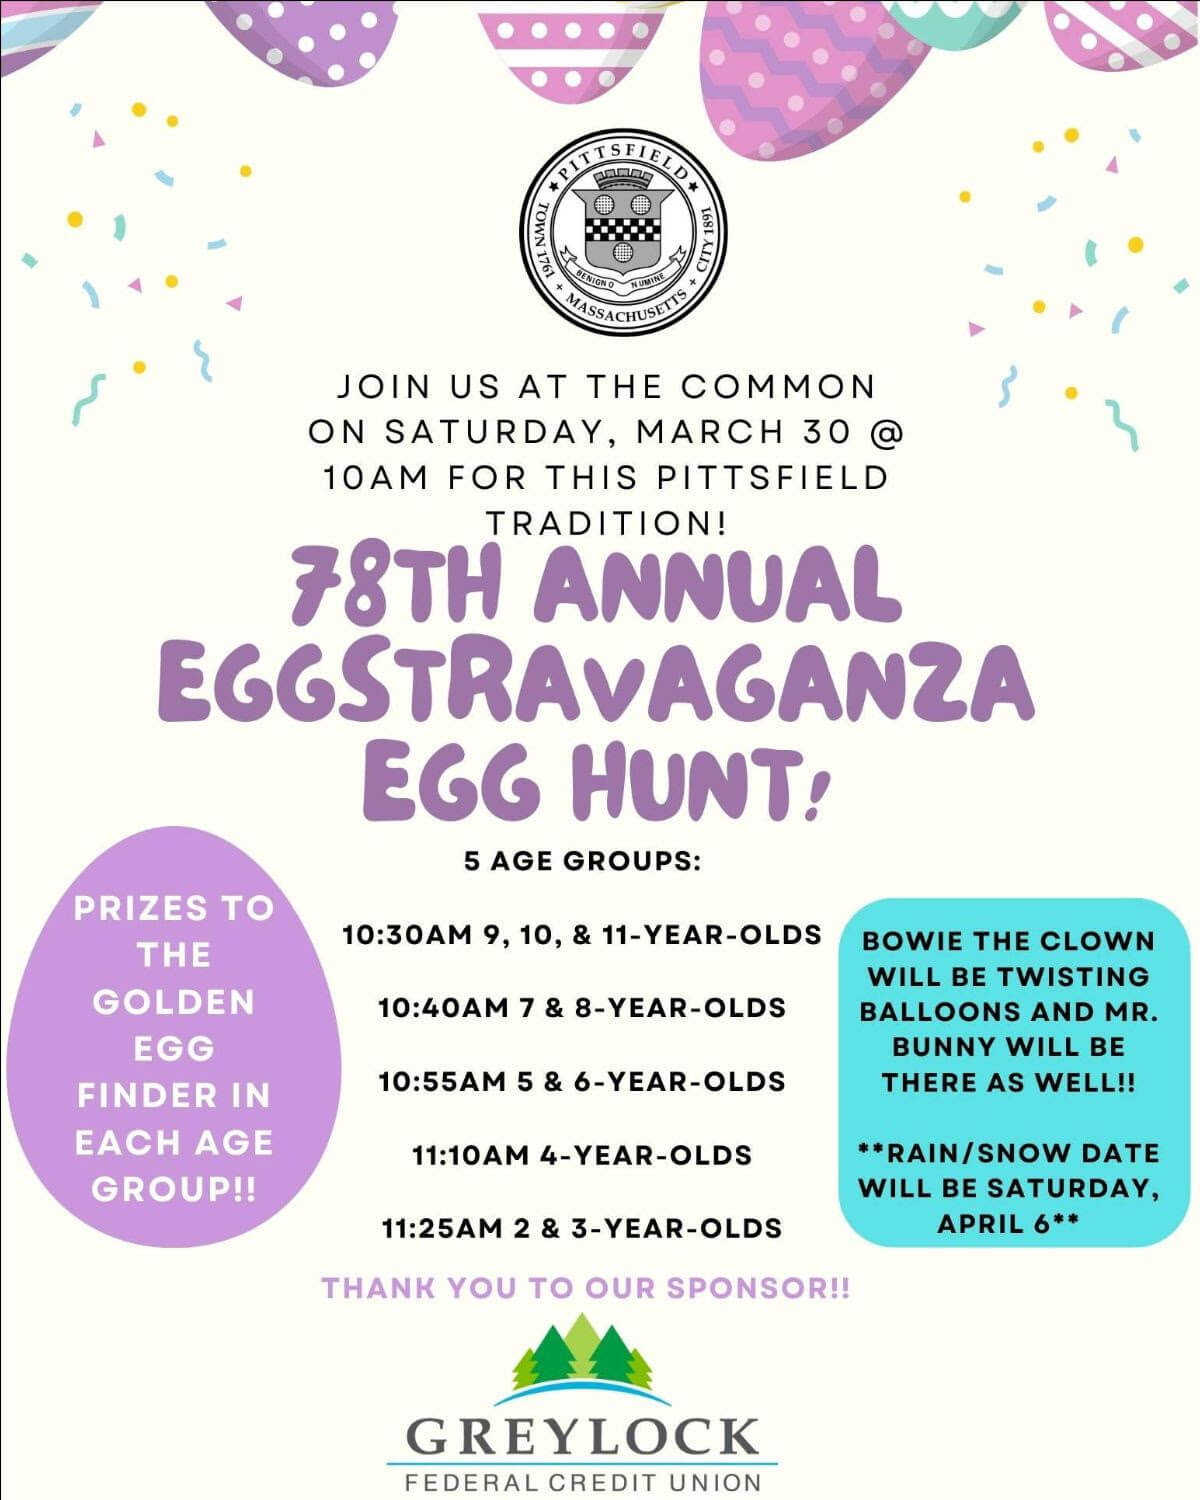 Pittsfield Easter Egg Hunt on March 30